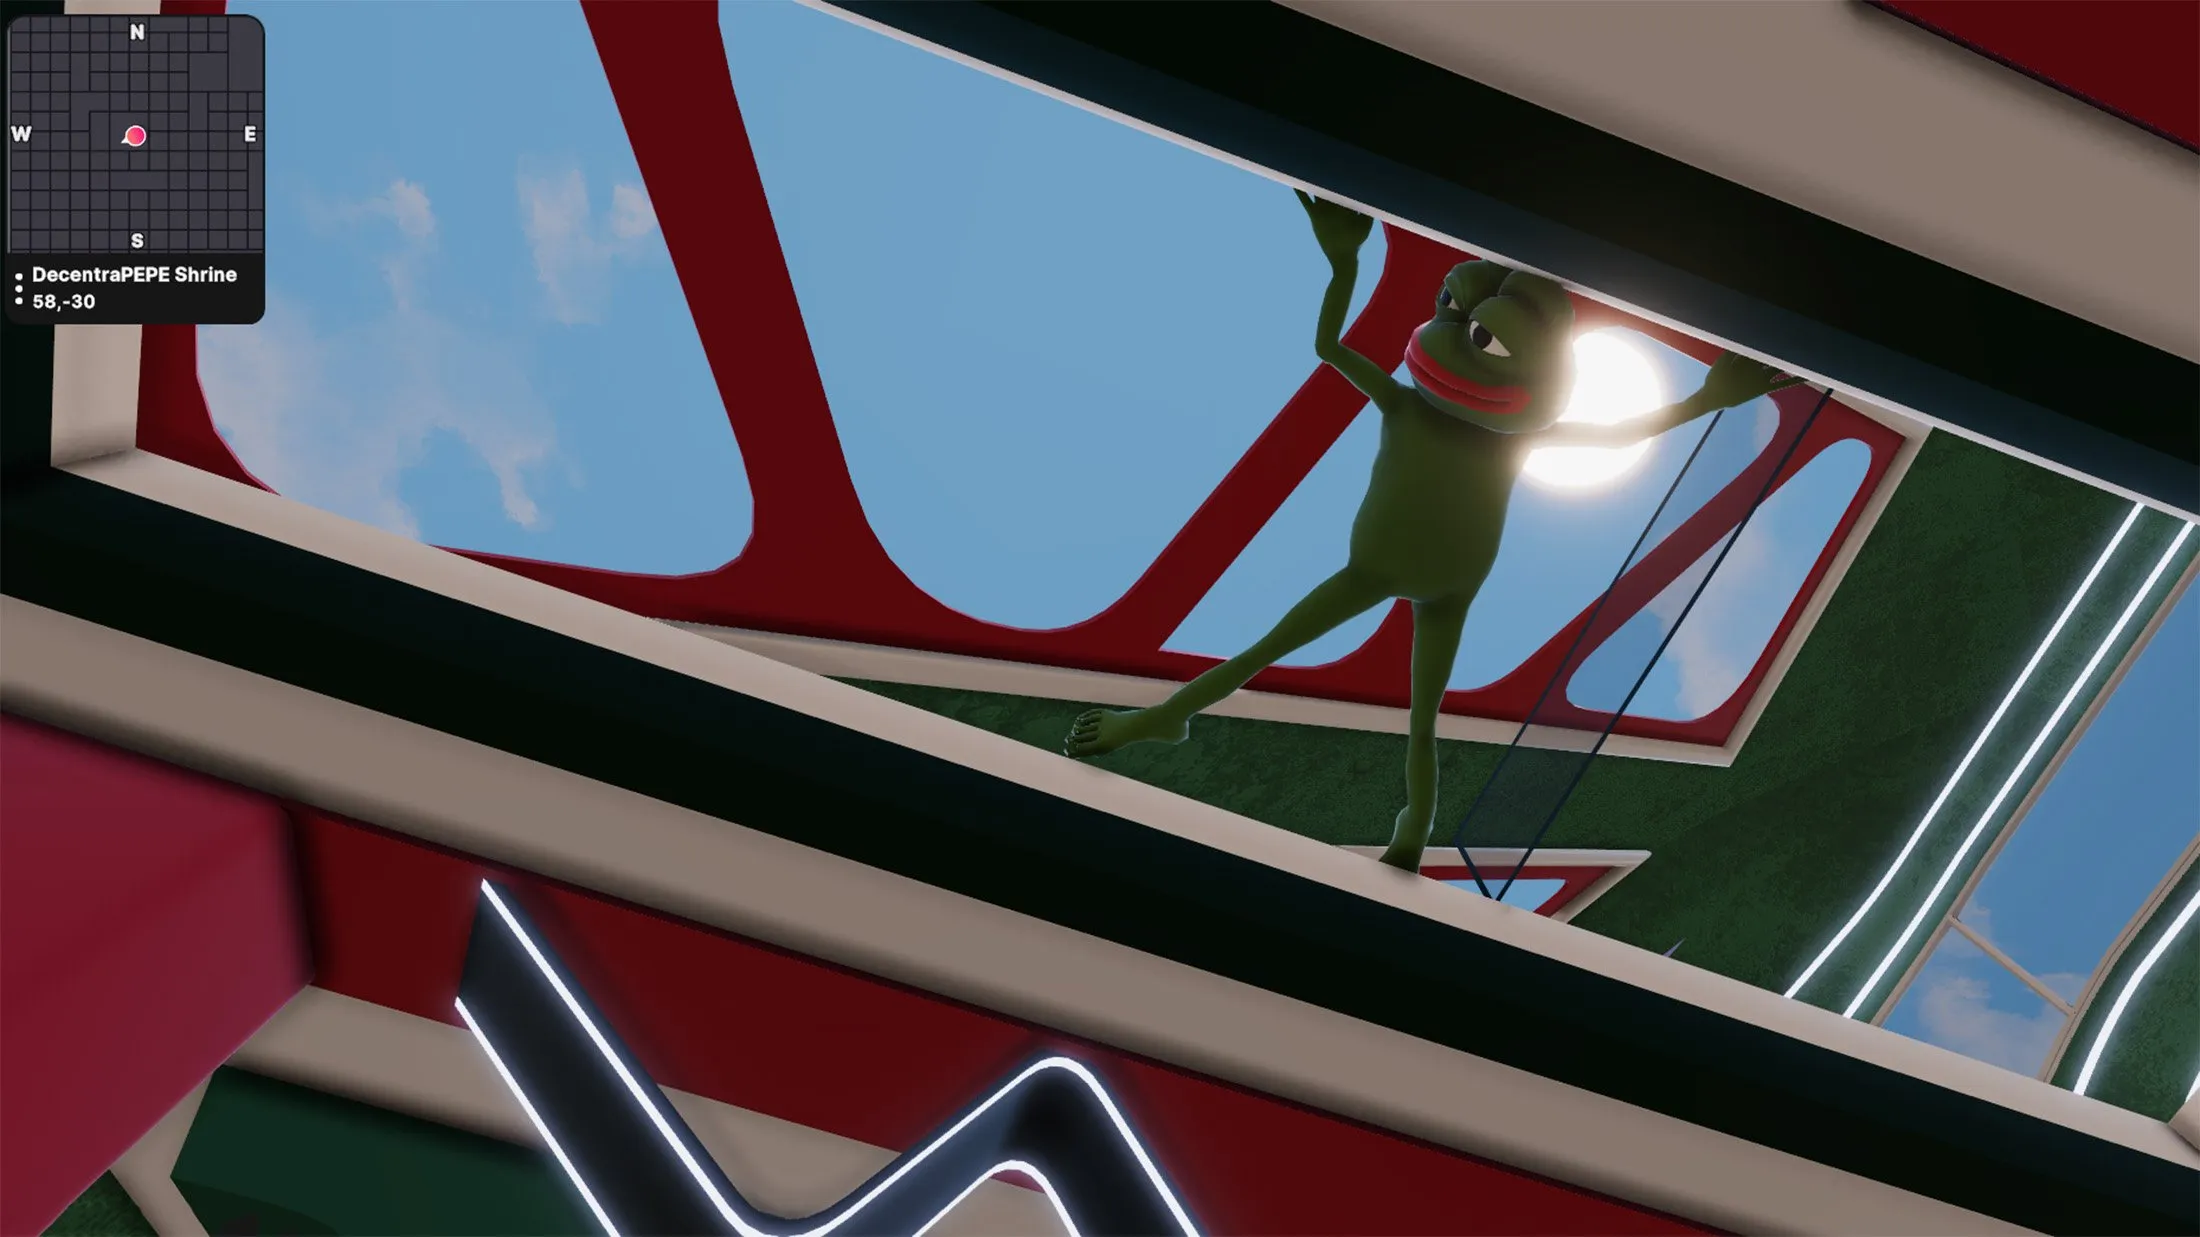 image of a PEPE characte from an installation within Decentraland's metaverse art week